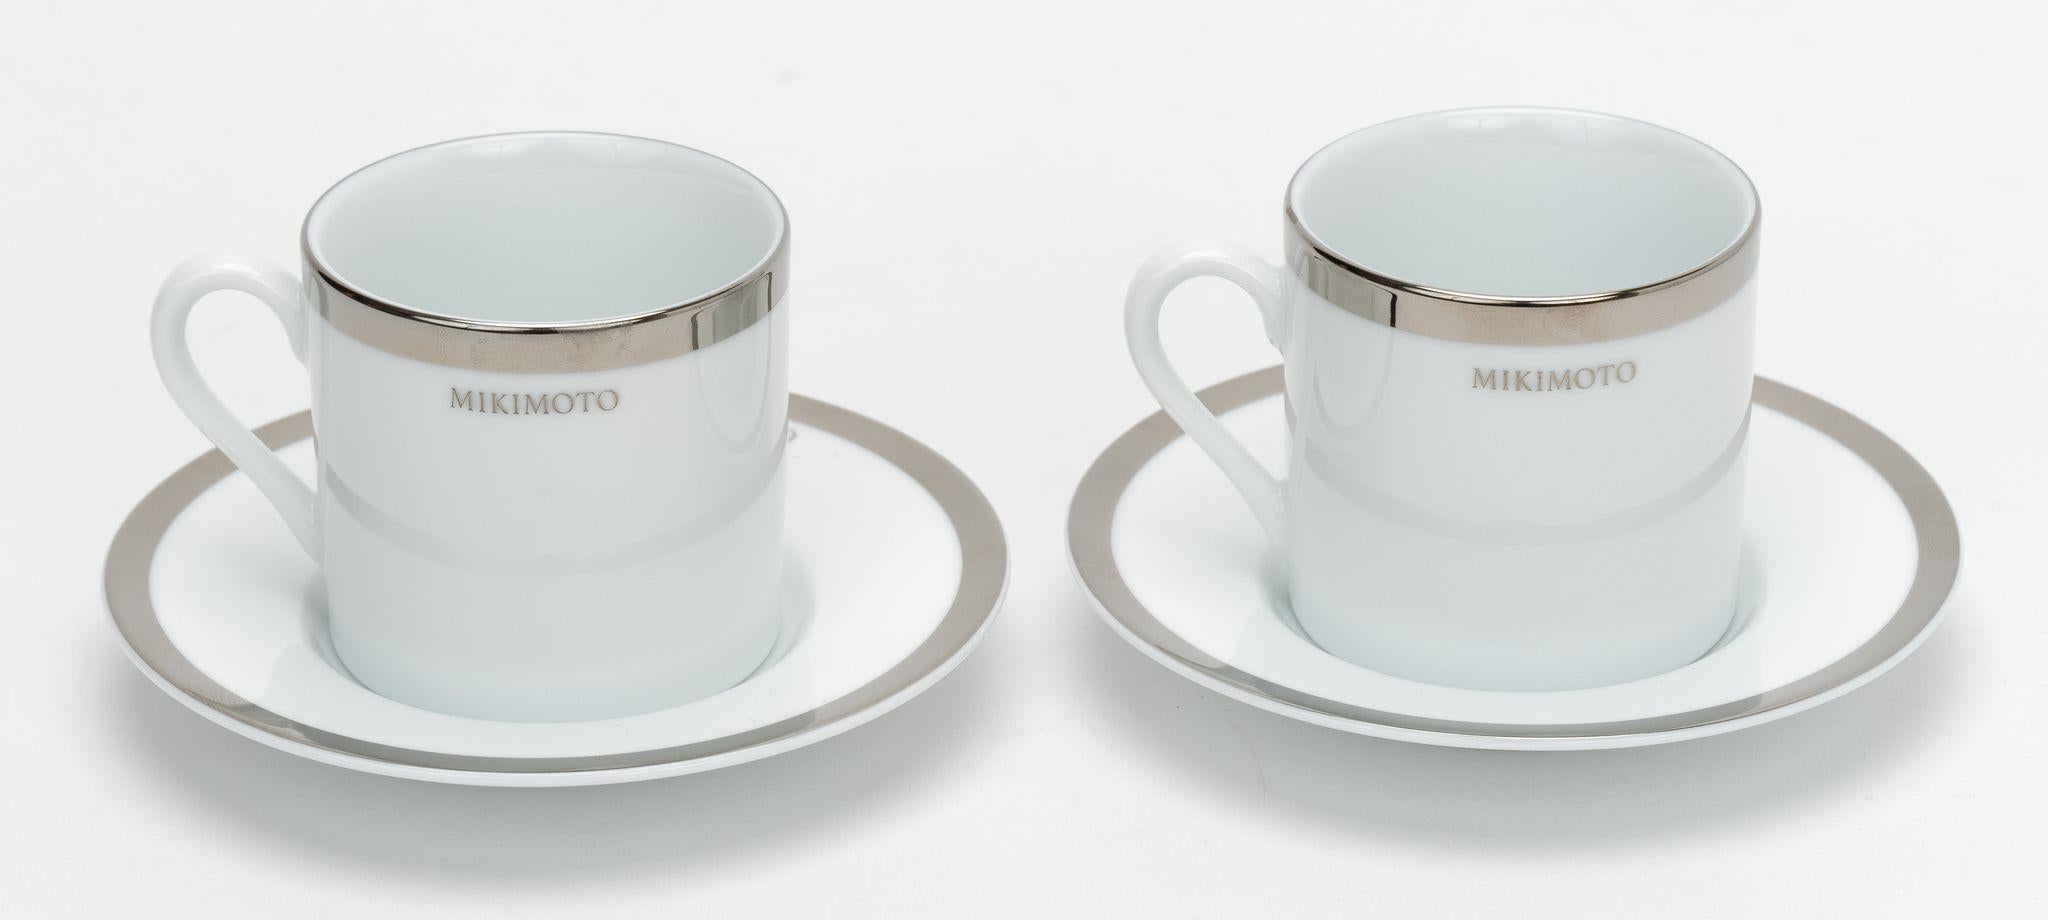 Mikimoto White and Platinum set of 2 coffee caps and saucers. Excellent condition.
Comes with original box.